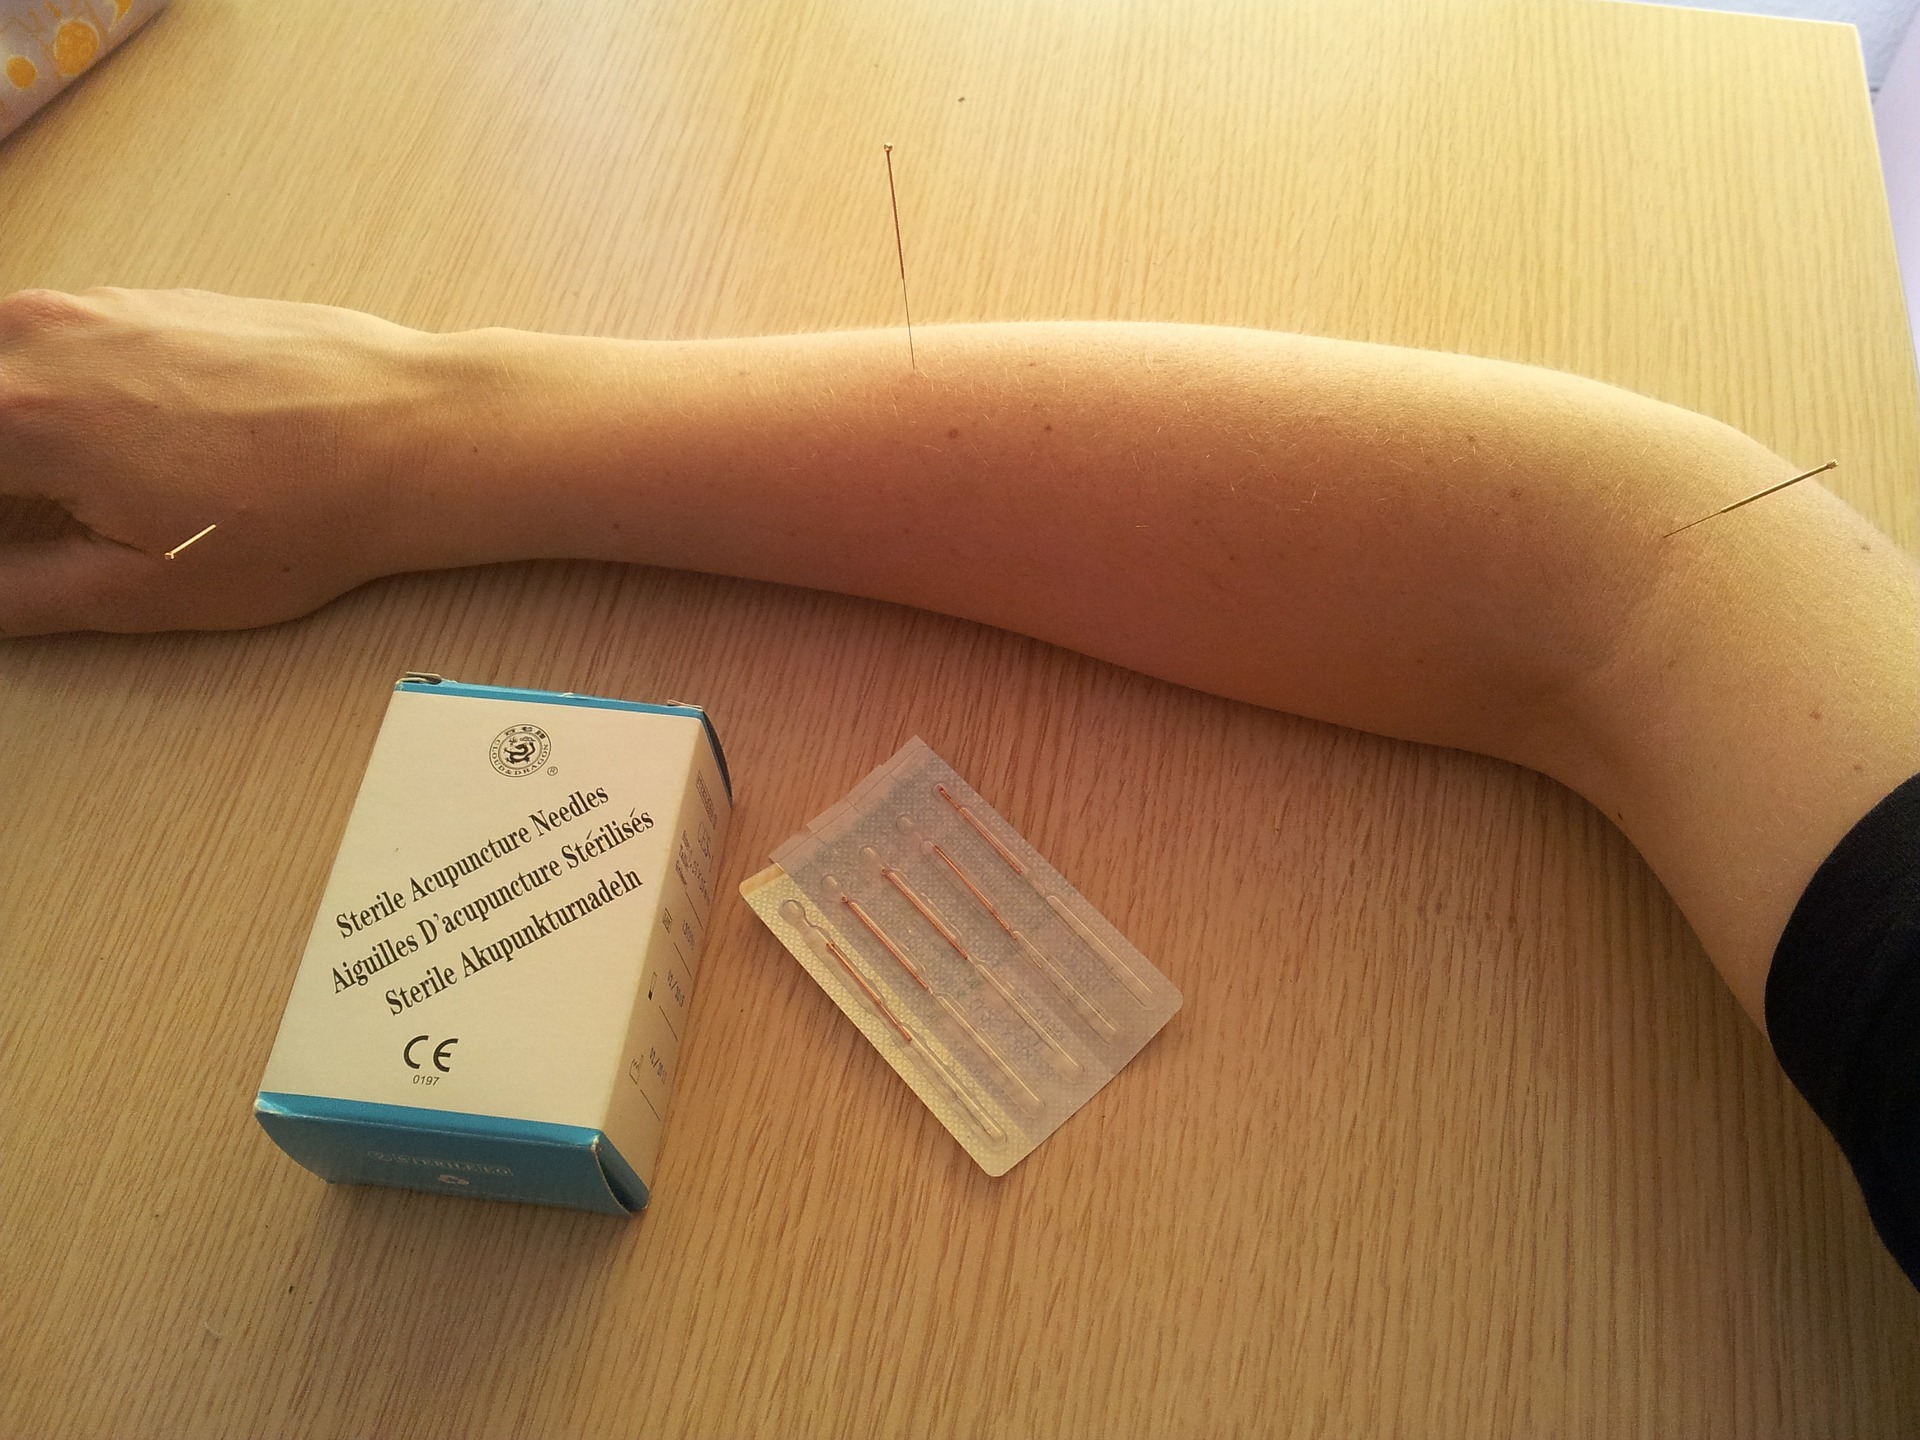 Acupunture needled in arm